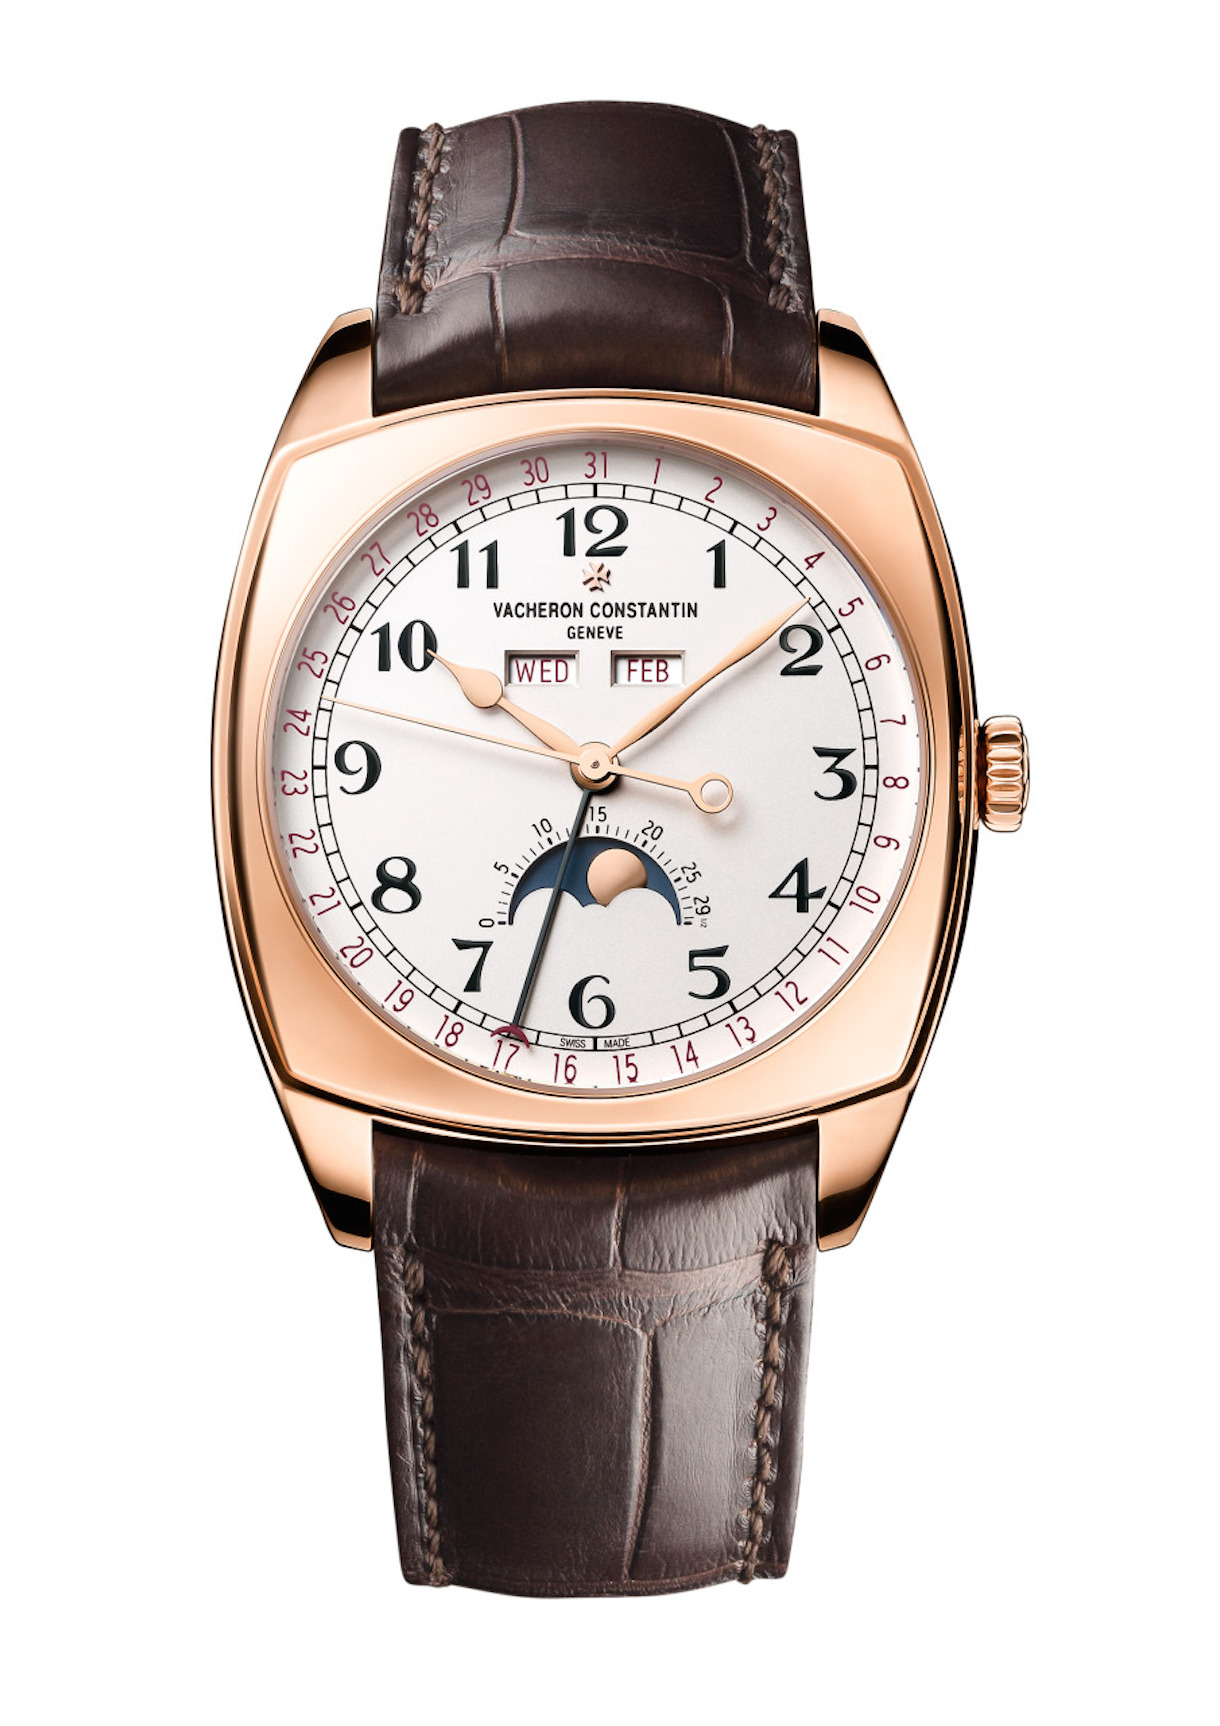 10 New Vacheron Constantin Harmony Watches You Don’t’ Want to Miss